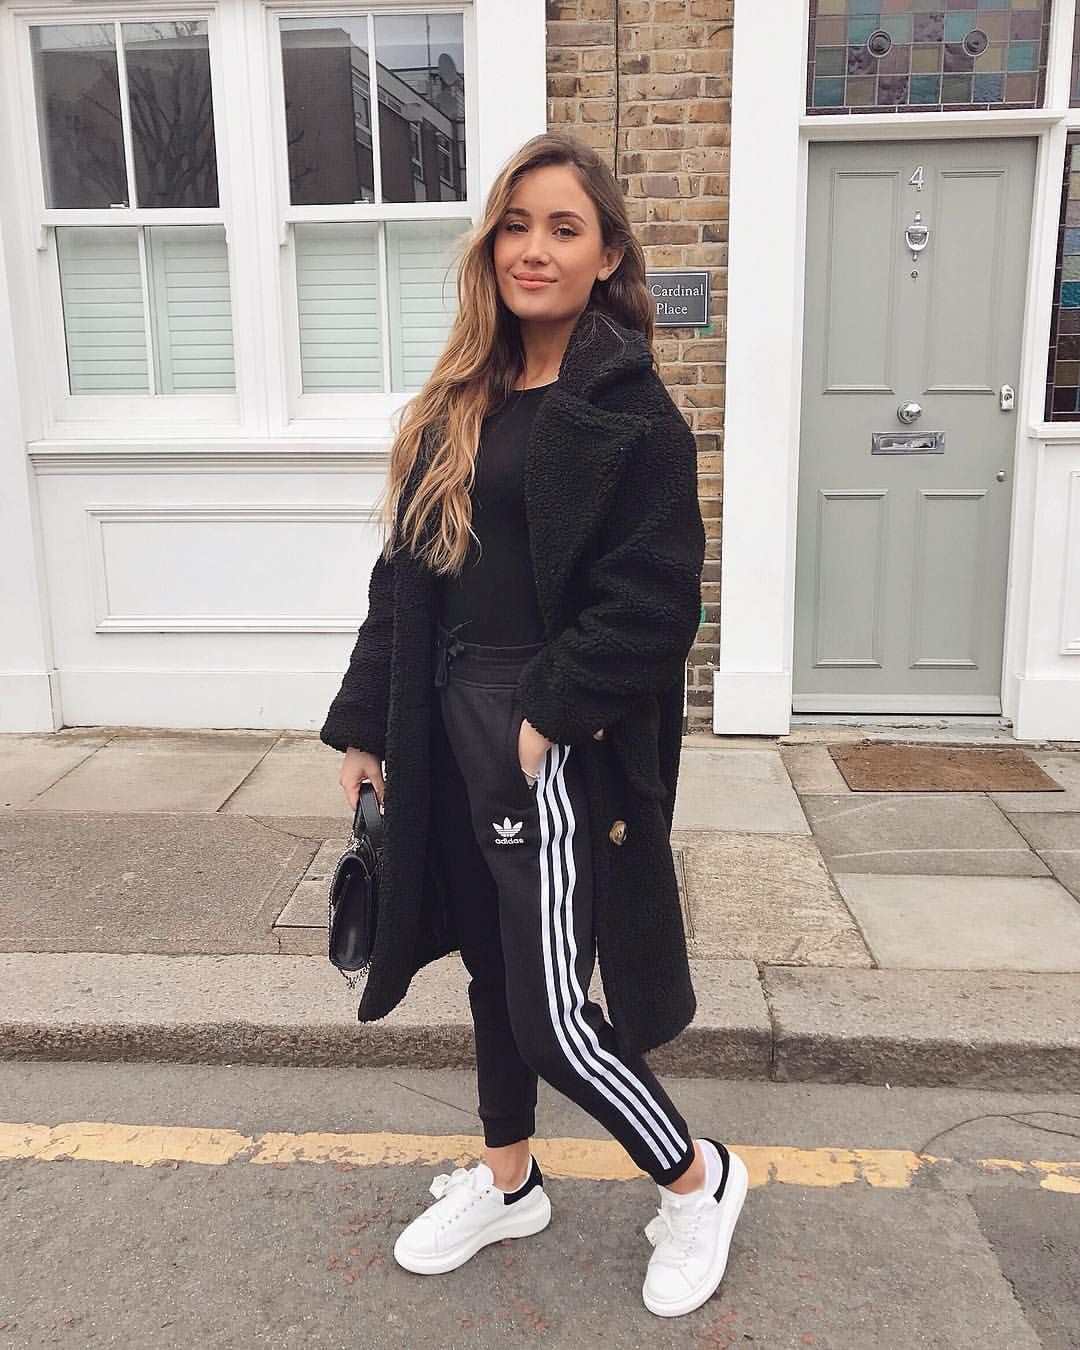 Af en toe Ziek persoon Reis Outfit jogging adidas femme, Adidas Superstar | Outfits With Sweatpants |  Adidas Originals, Adidas Superstar, Casual wear